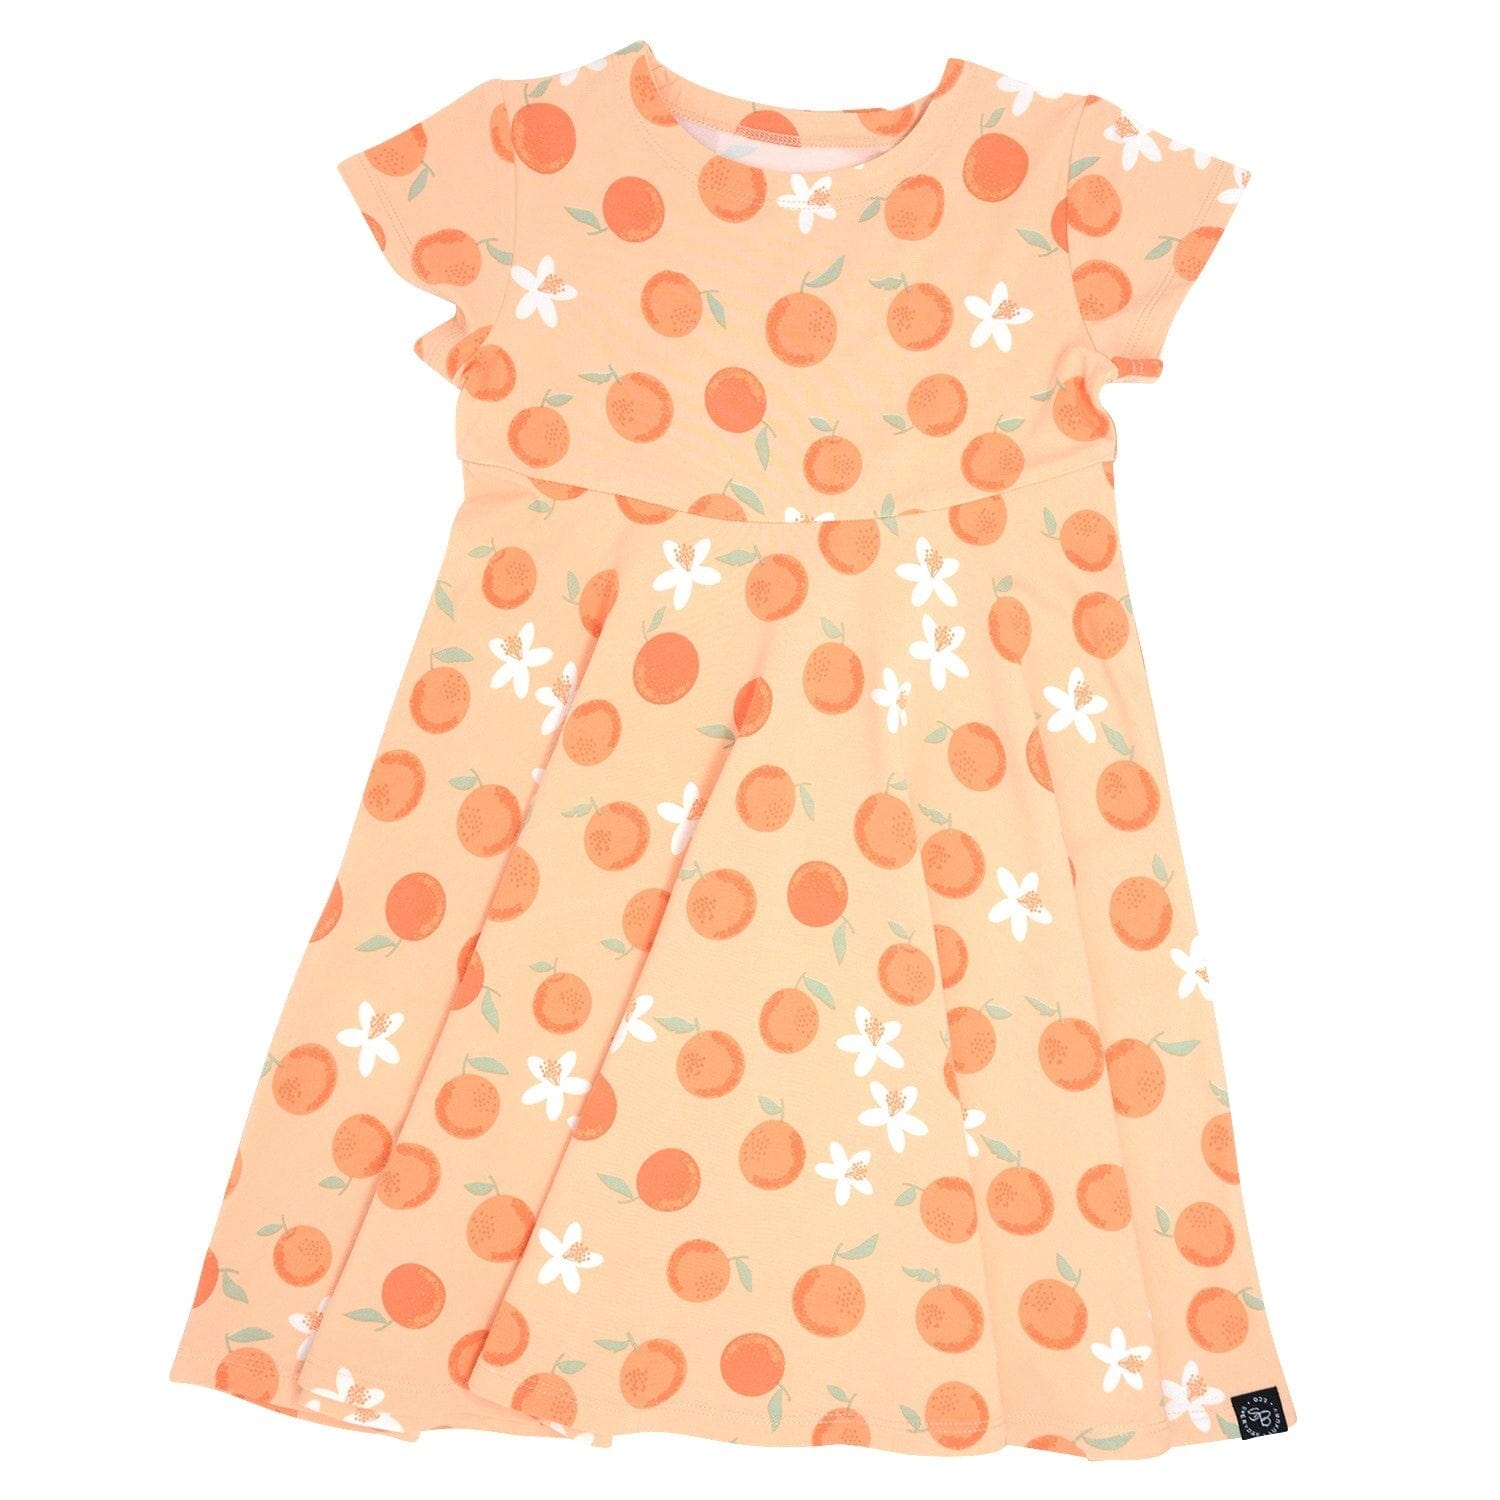 Colorful polka dot tee t shirt | a look beyond compare